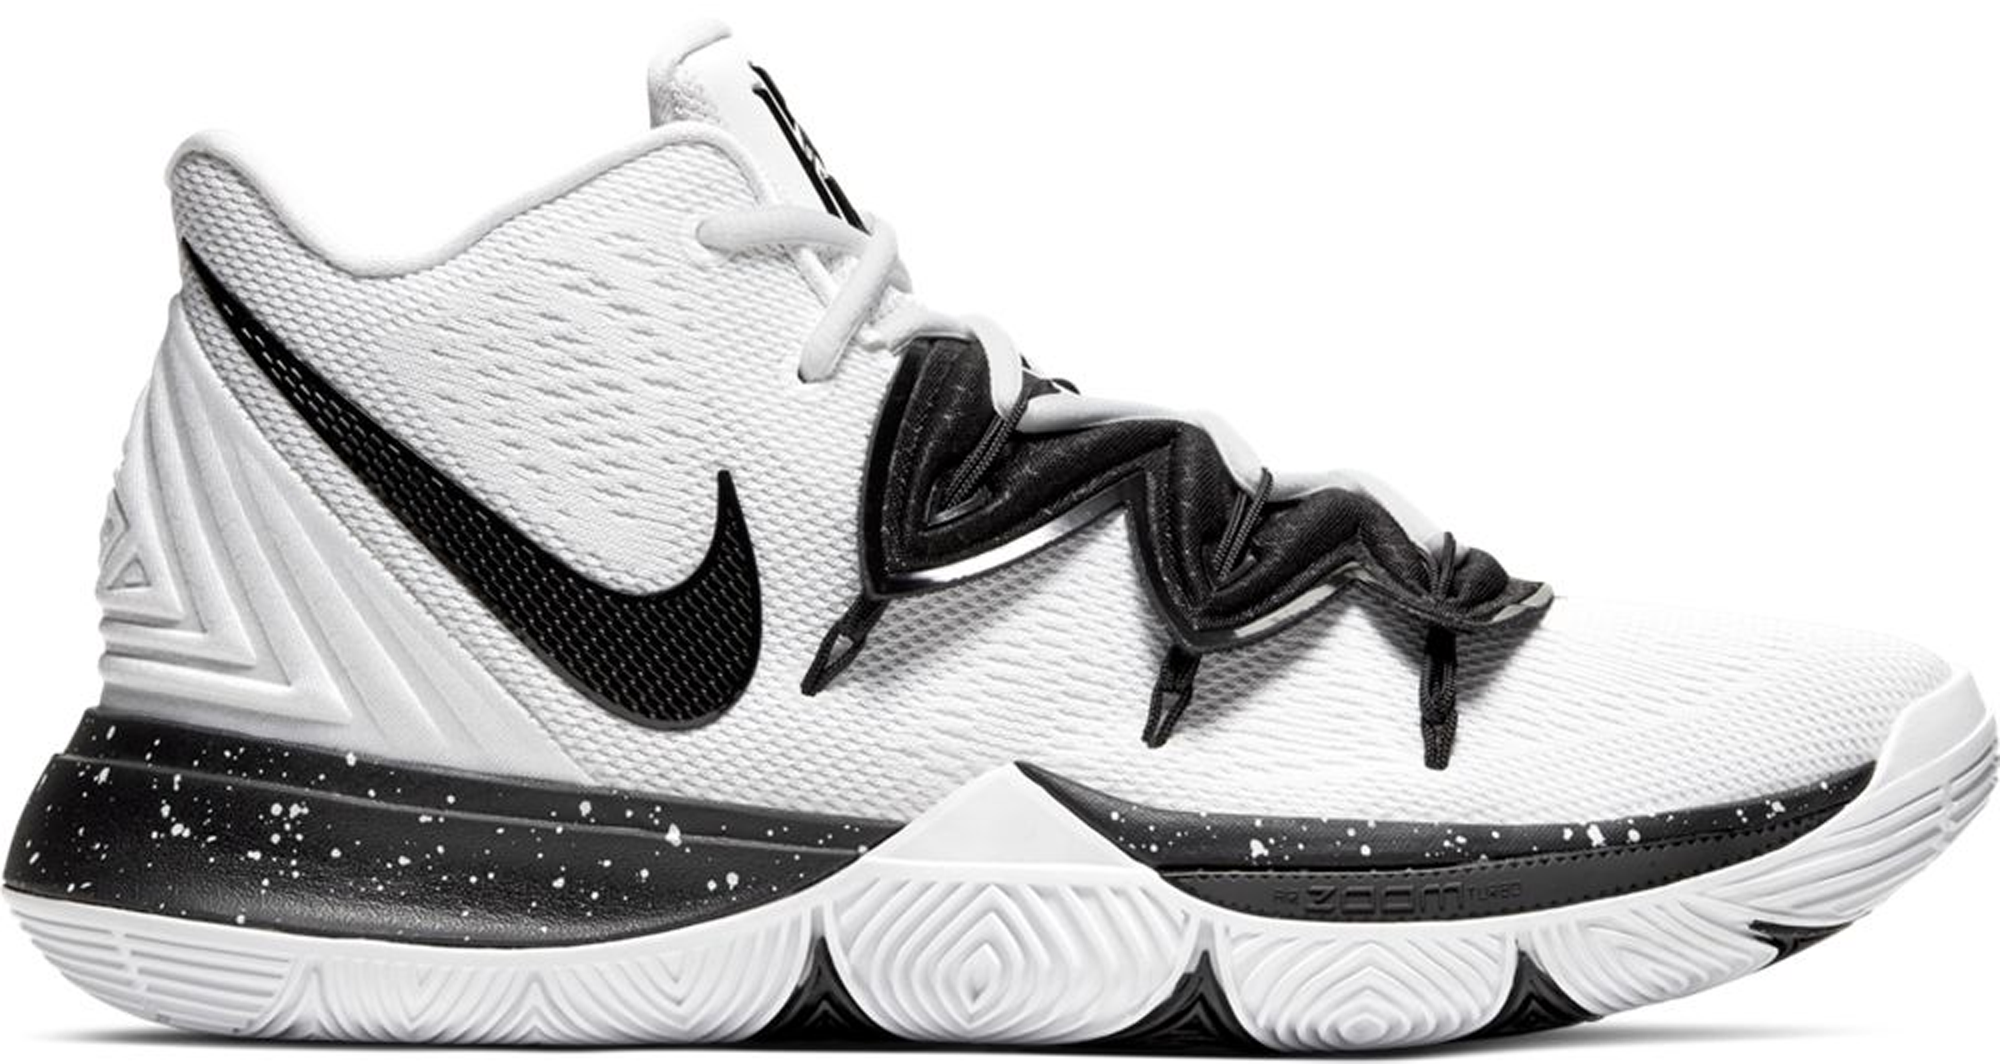 white kyrie 5 basketball shoes